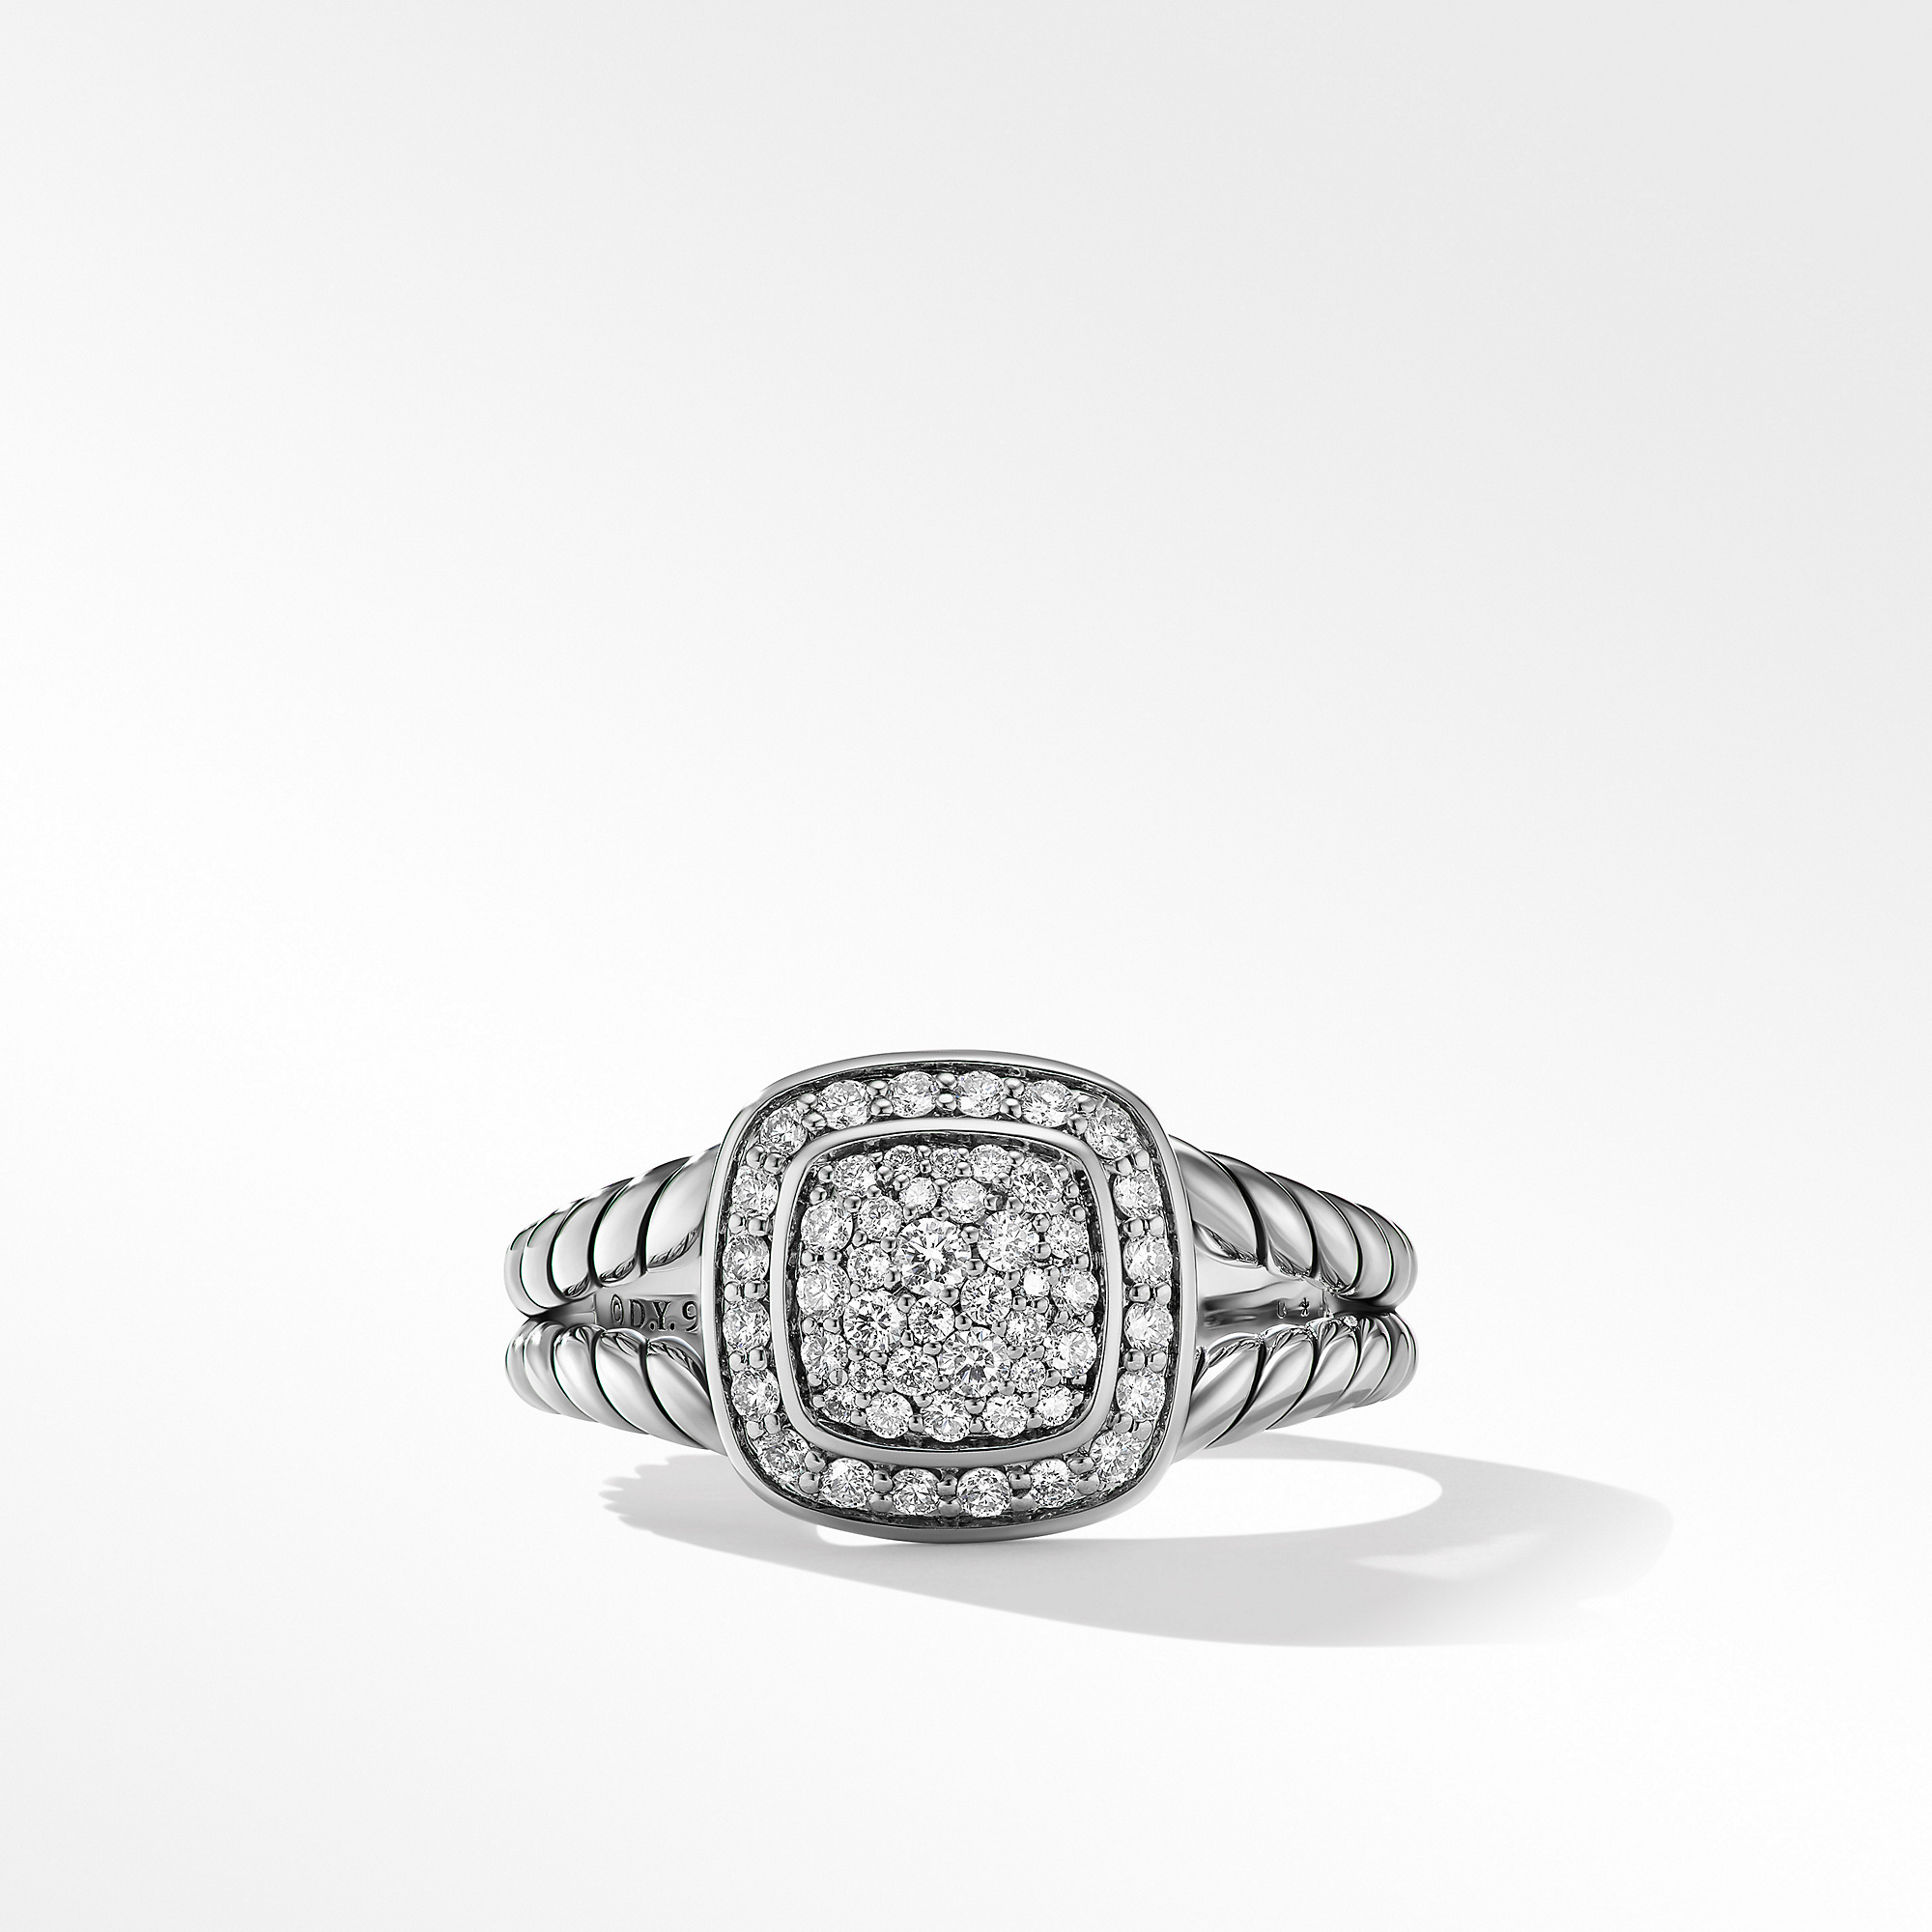 Petite Albion® Ring in Sterling Silver with Pavé Diamonds, 7mm